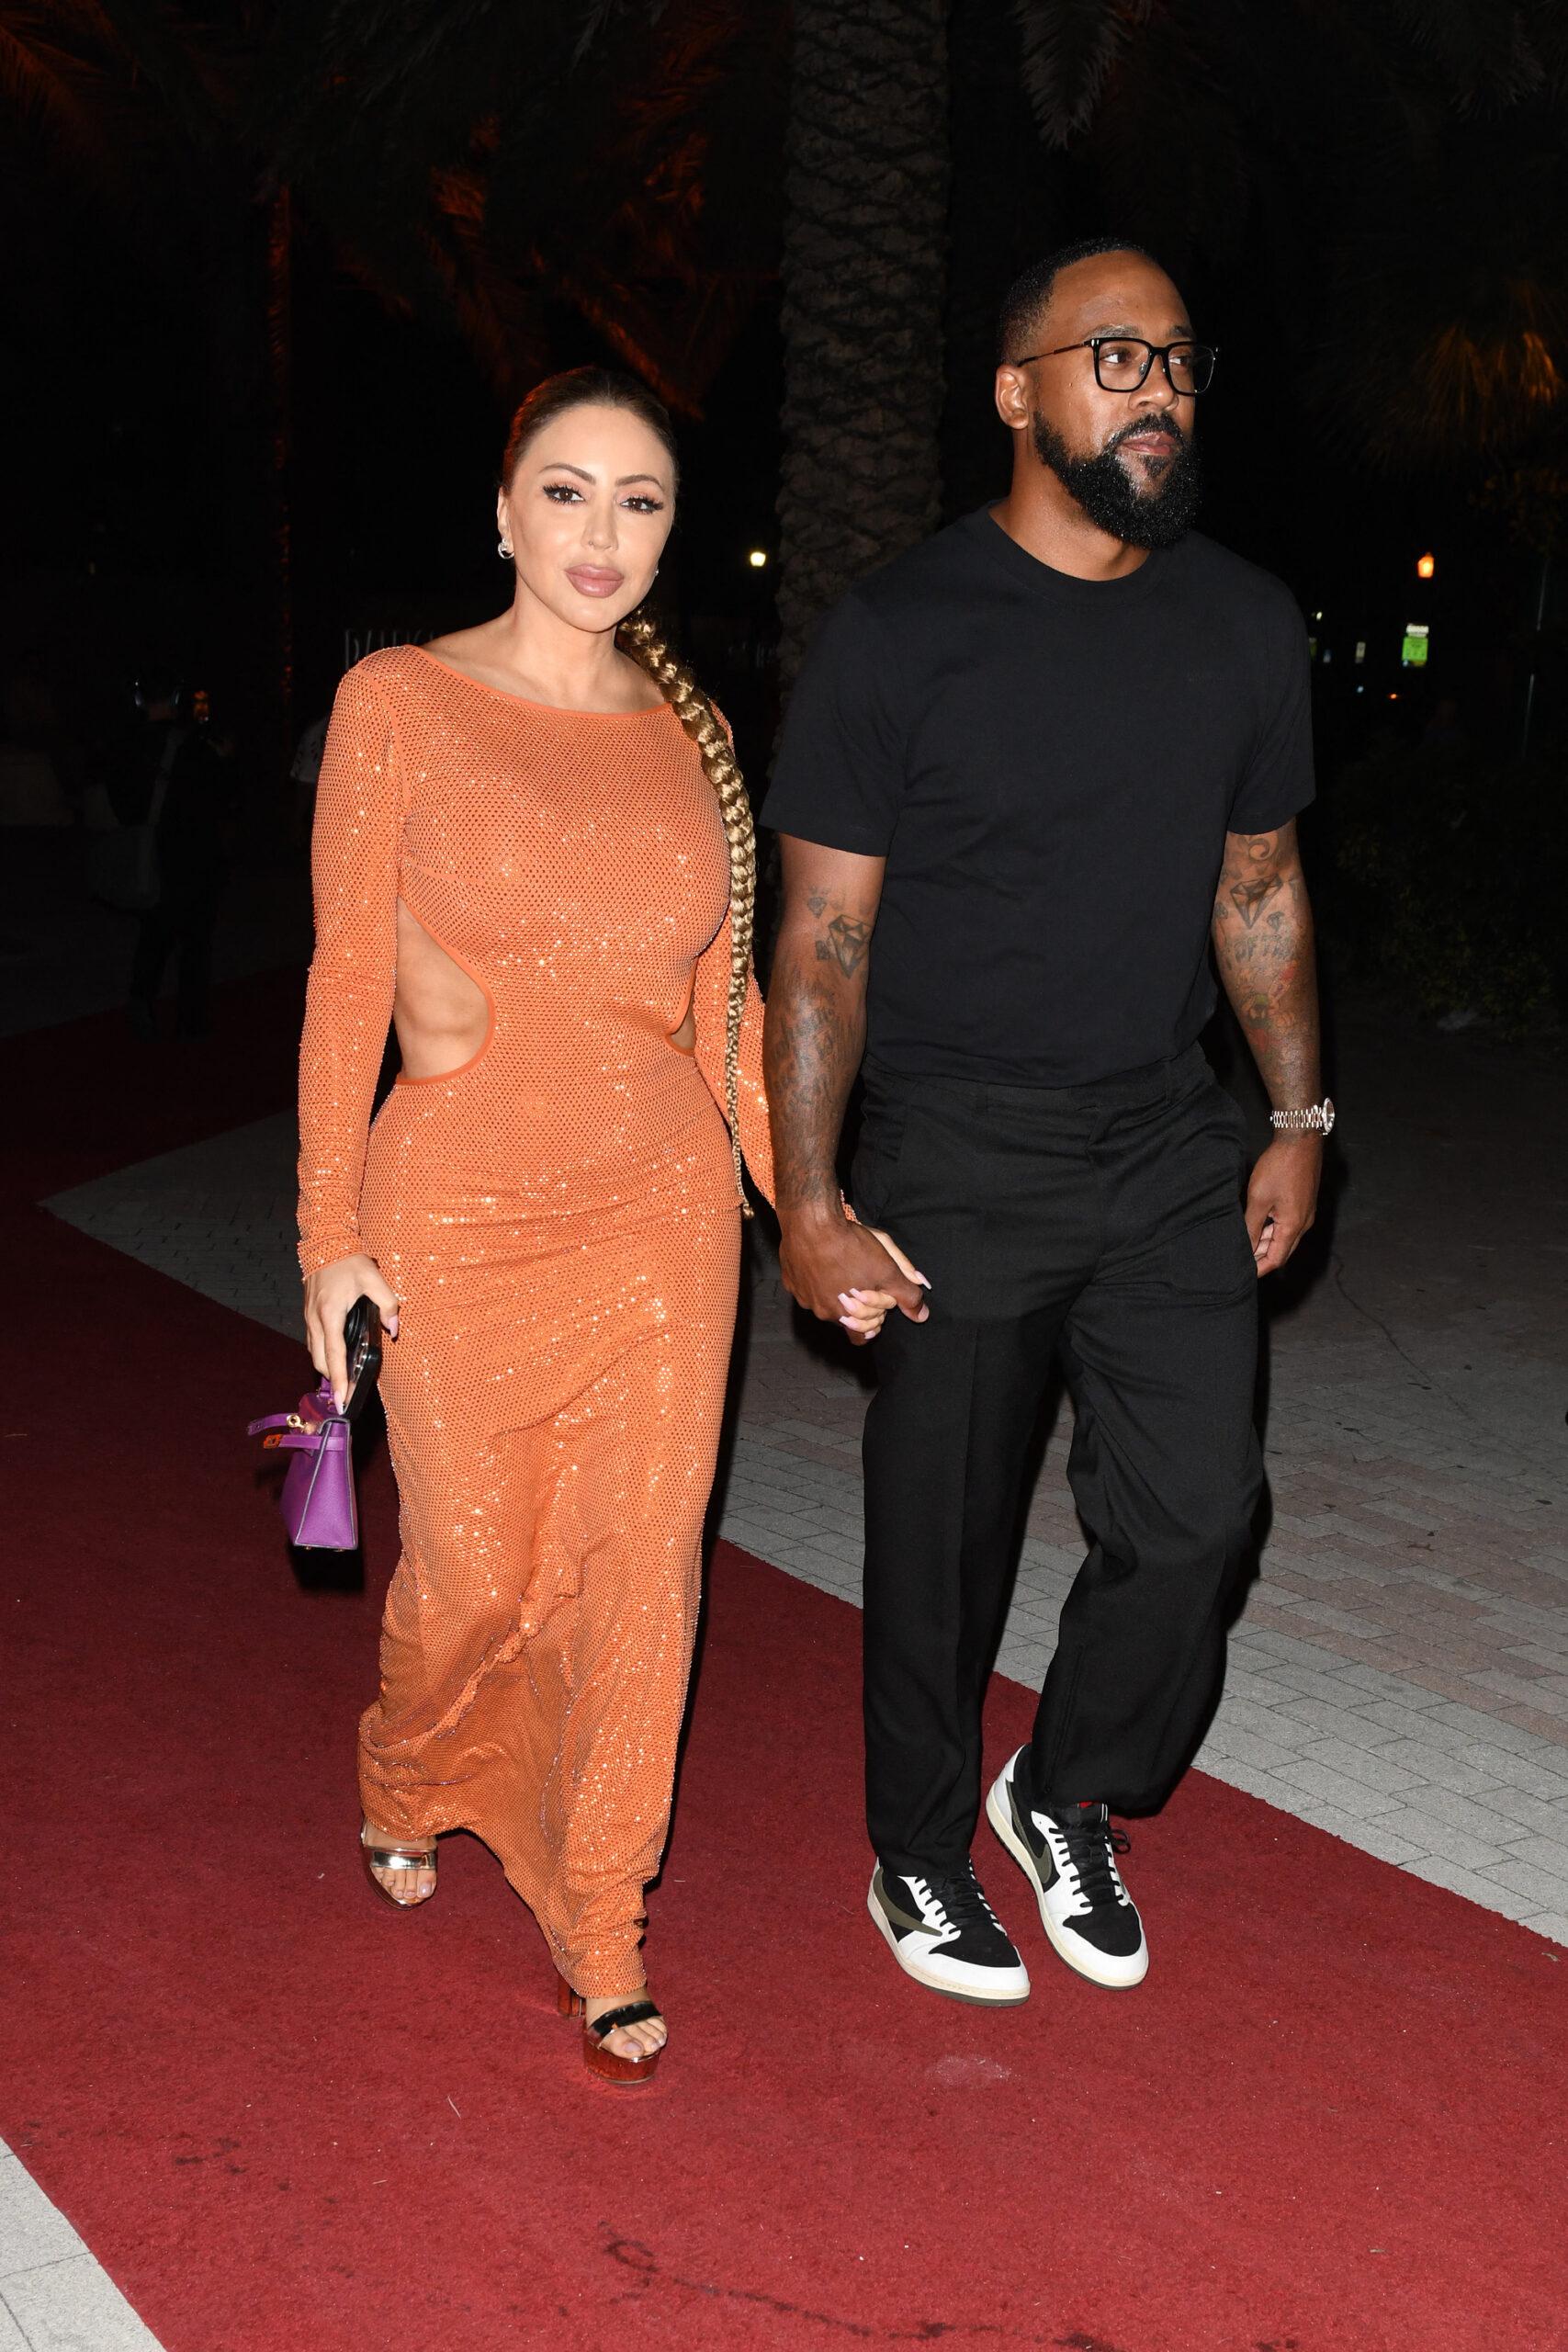 Larsa Pippen And Marcus Jordan arrive for the final night of Carbone Beach in Miami